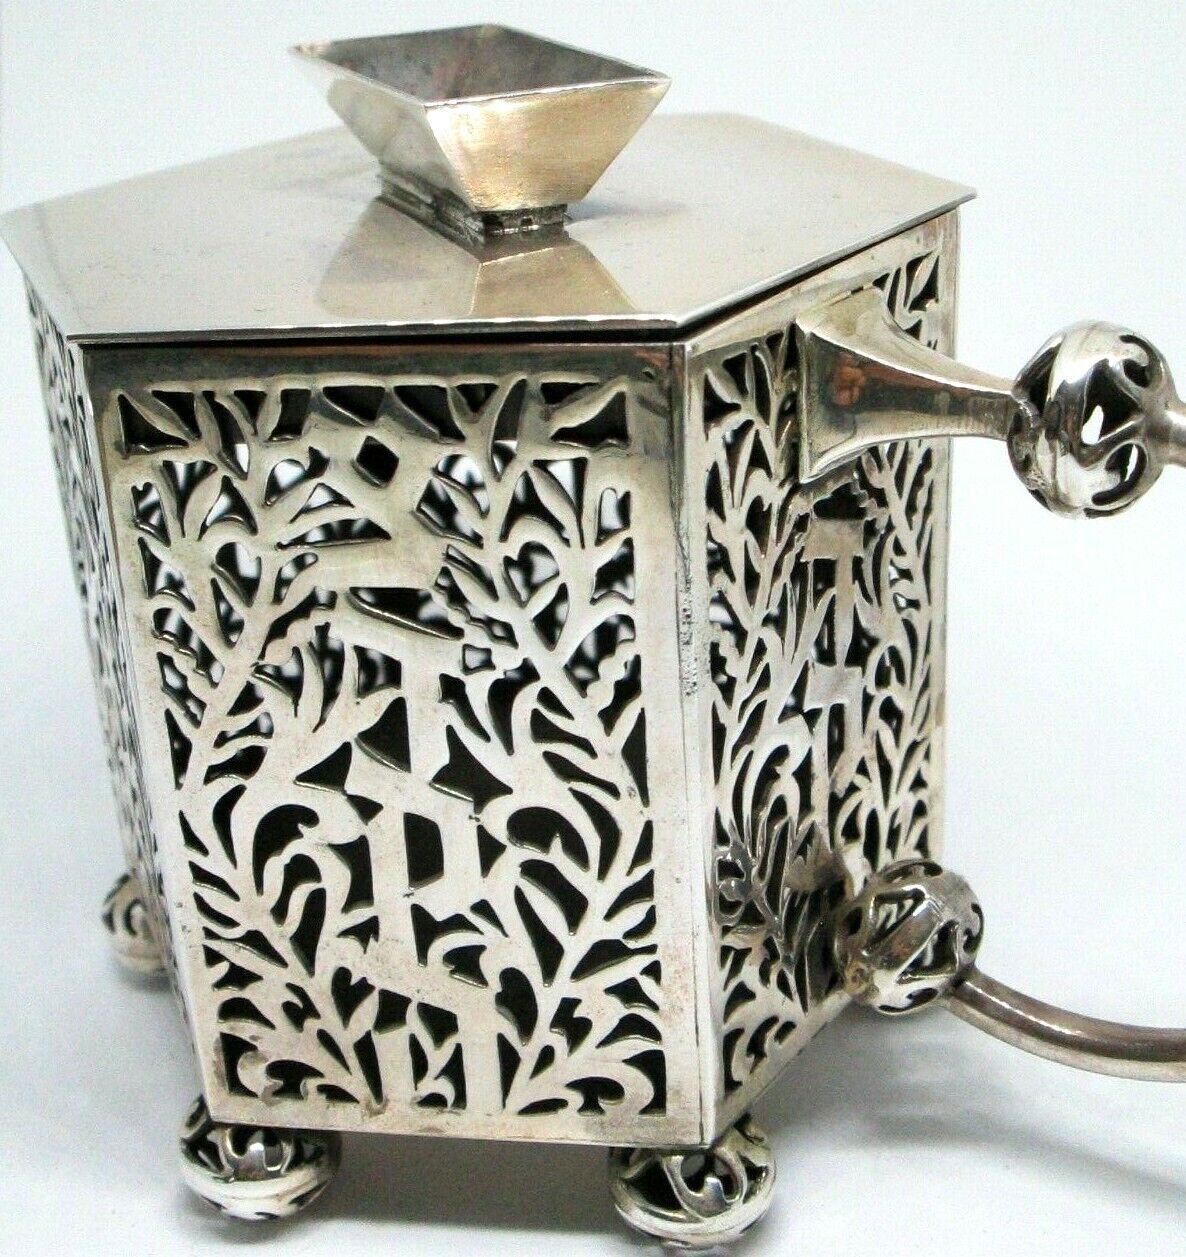 ZEDAKA BOX HANDMADE STERLING SILVER 6 ANGLES CUT OUT DESIGN WITH HANDLE  